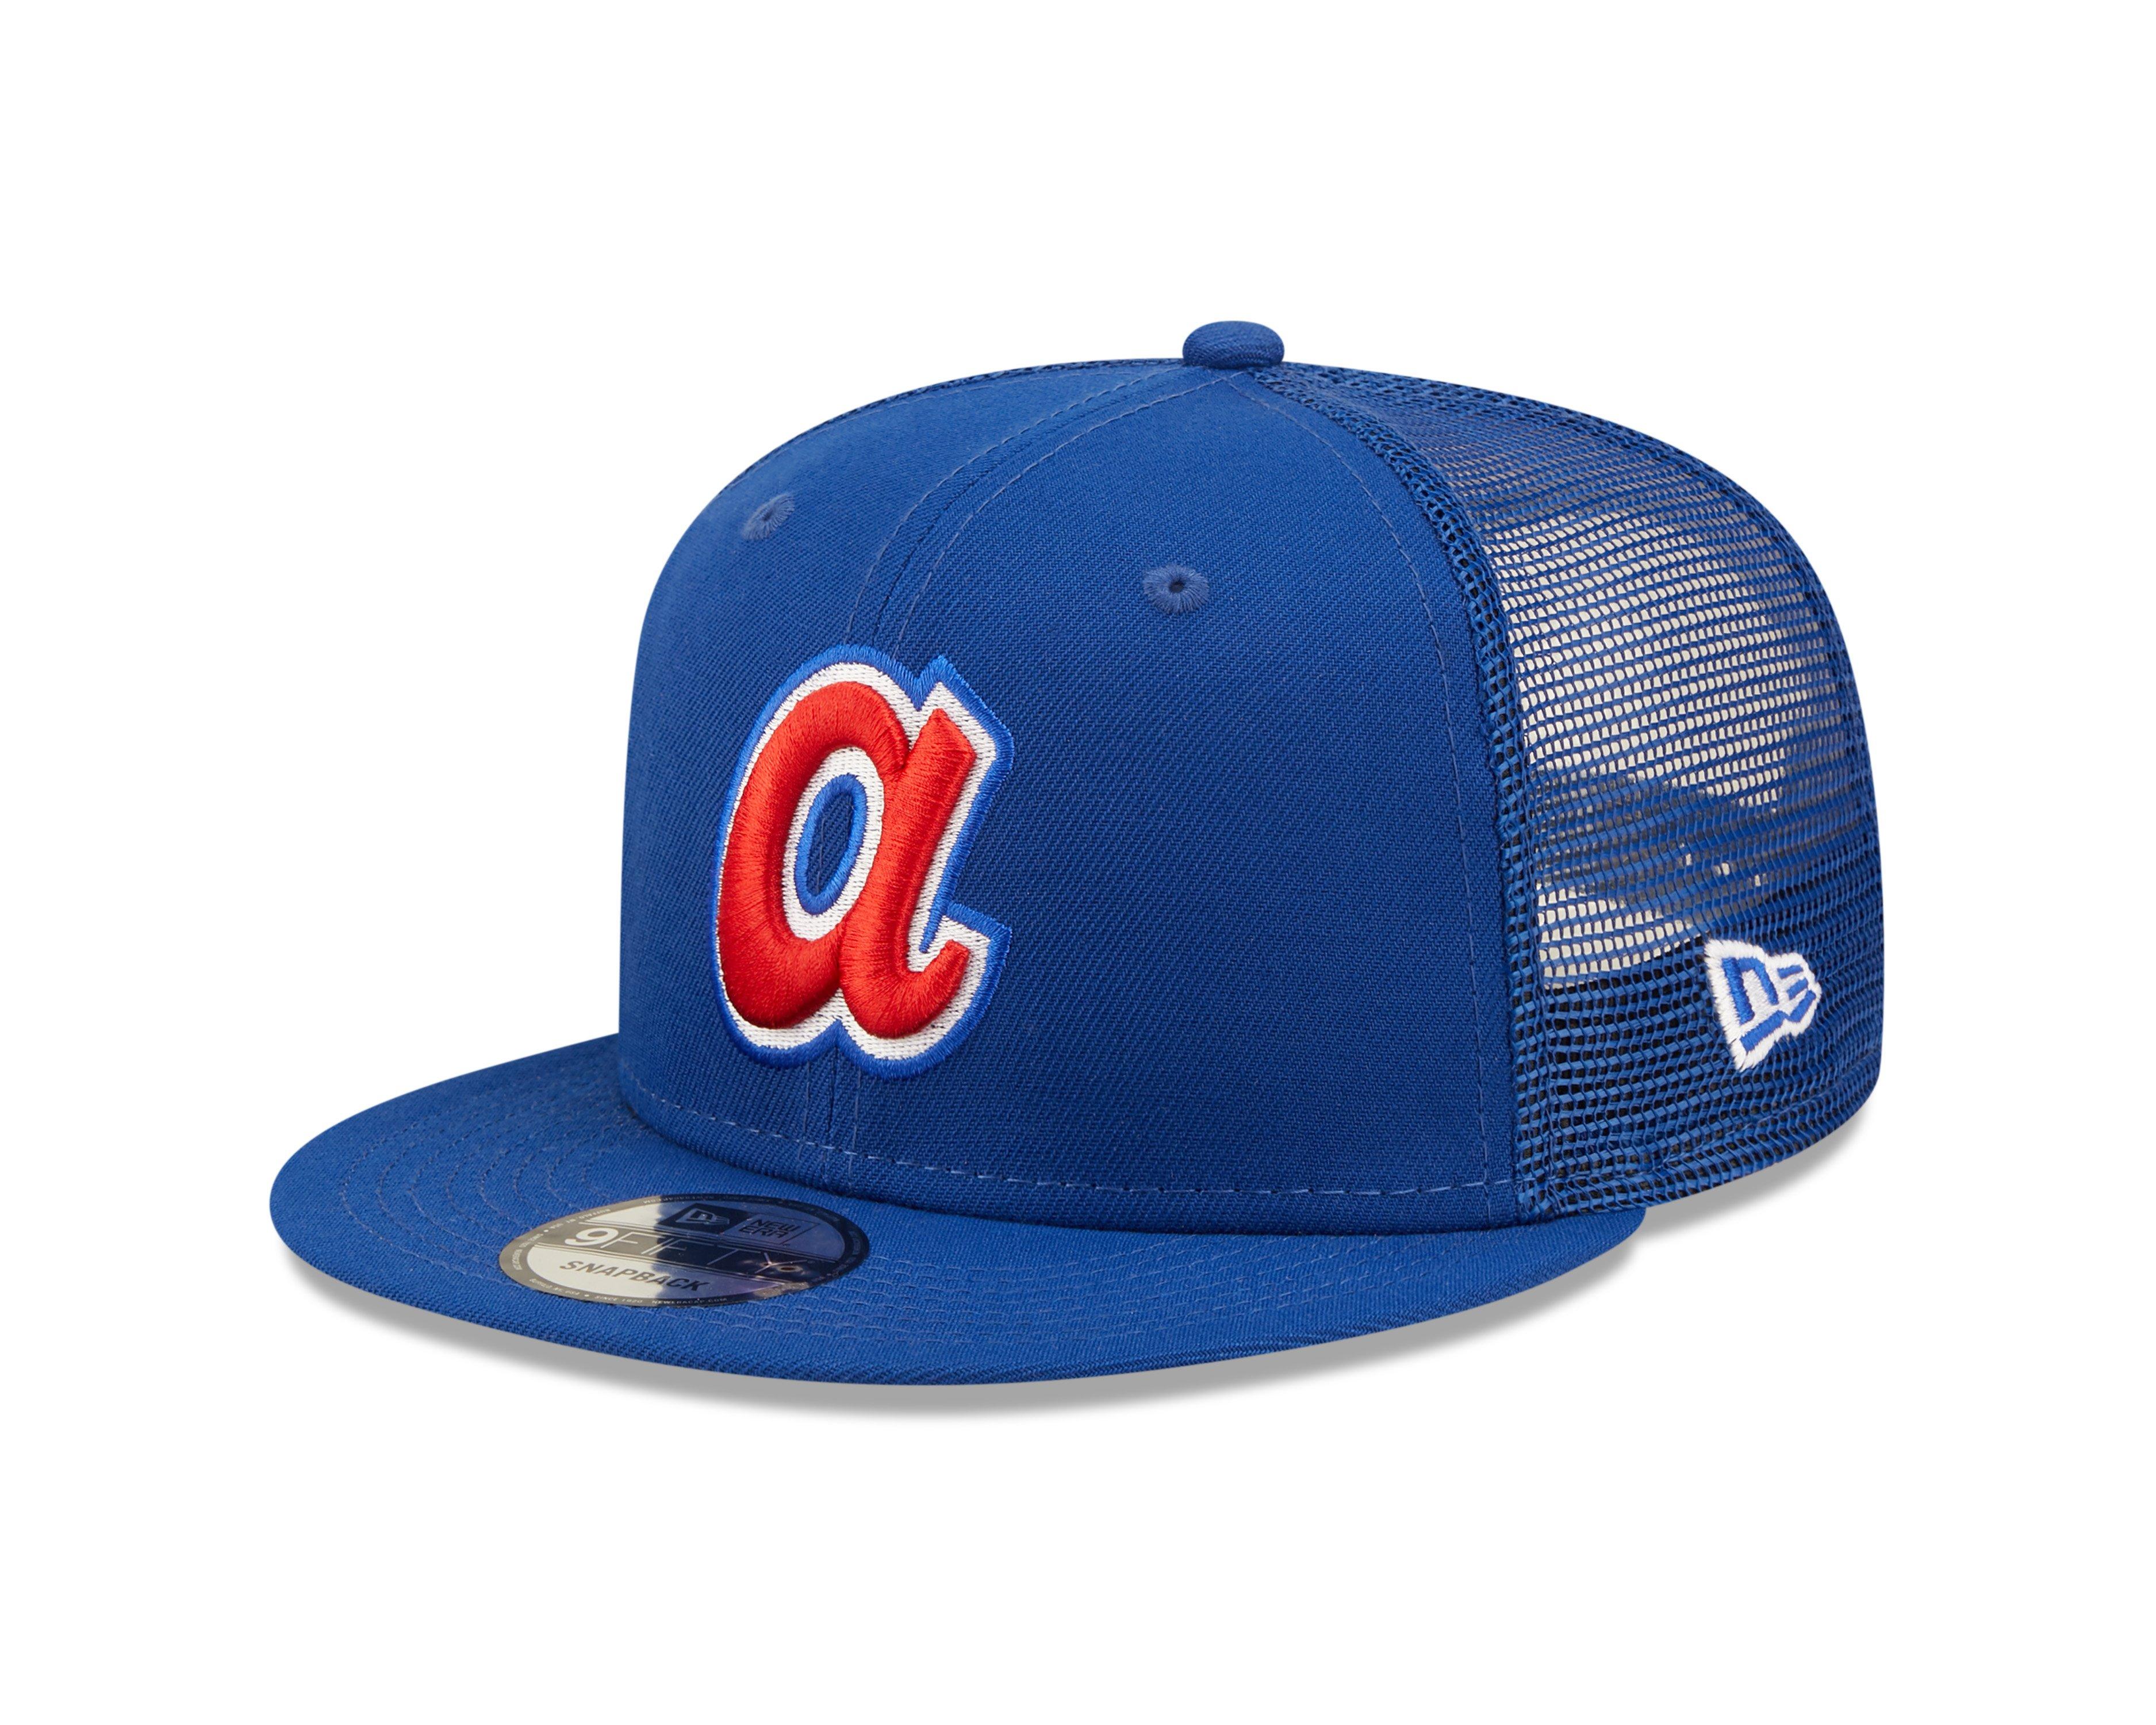 Atlanta Braves Nike Cooperstown Collection Pro Snapback Hat - Royal